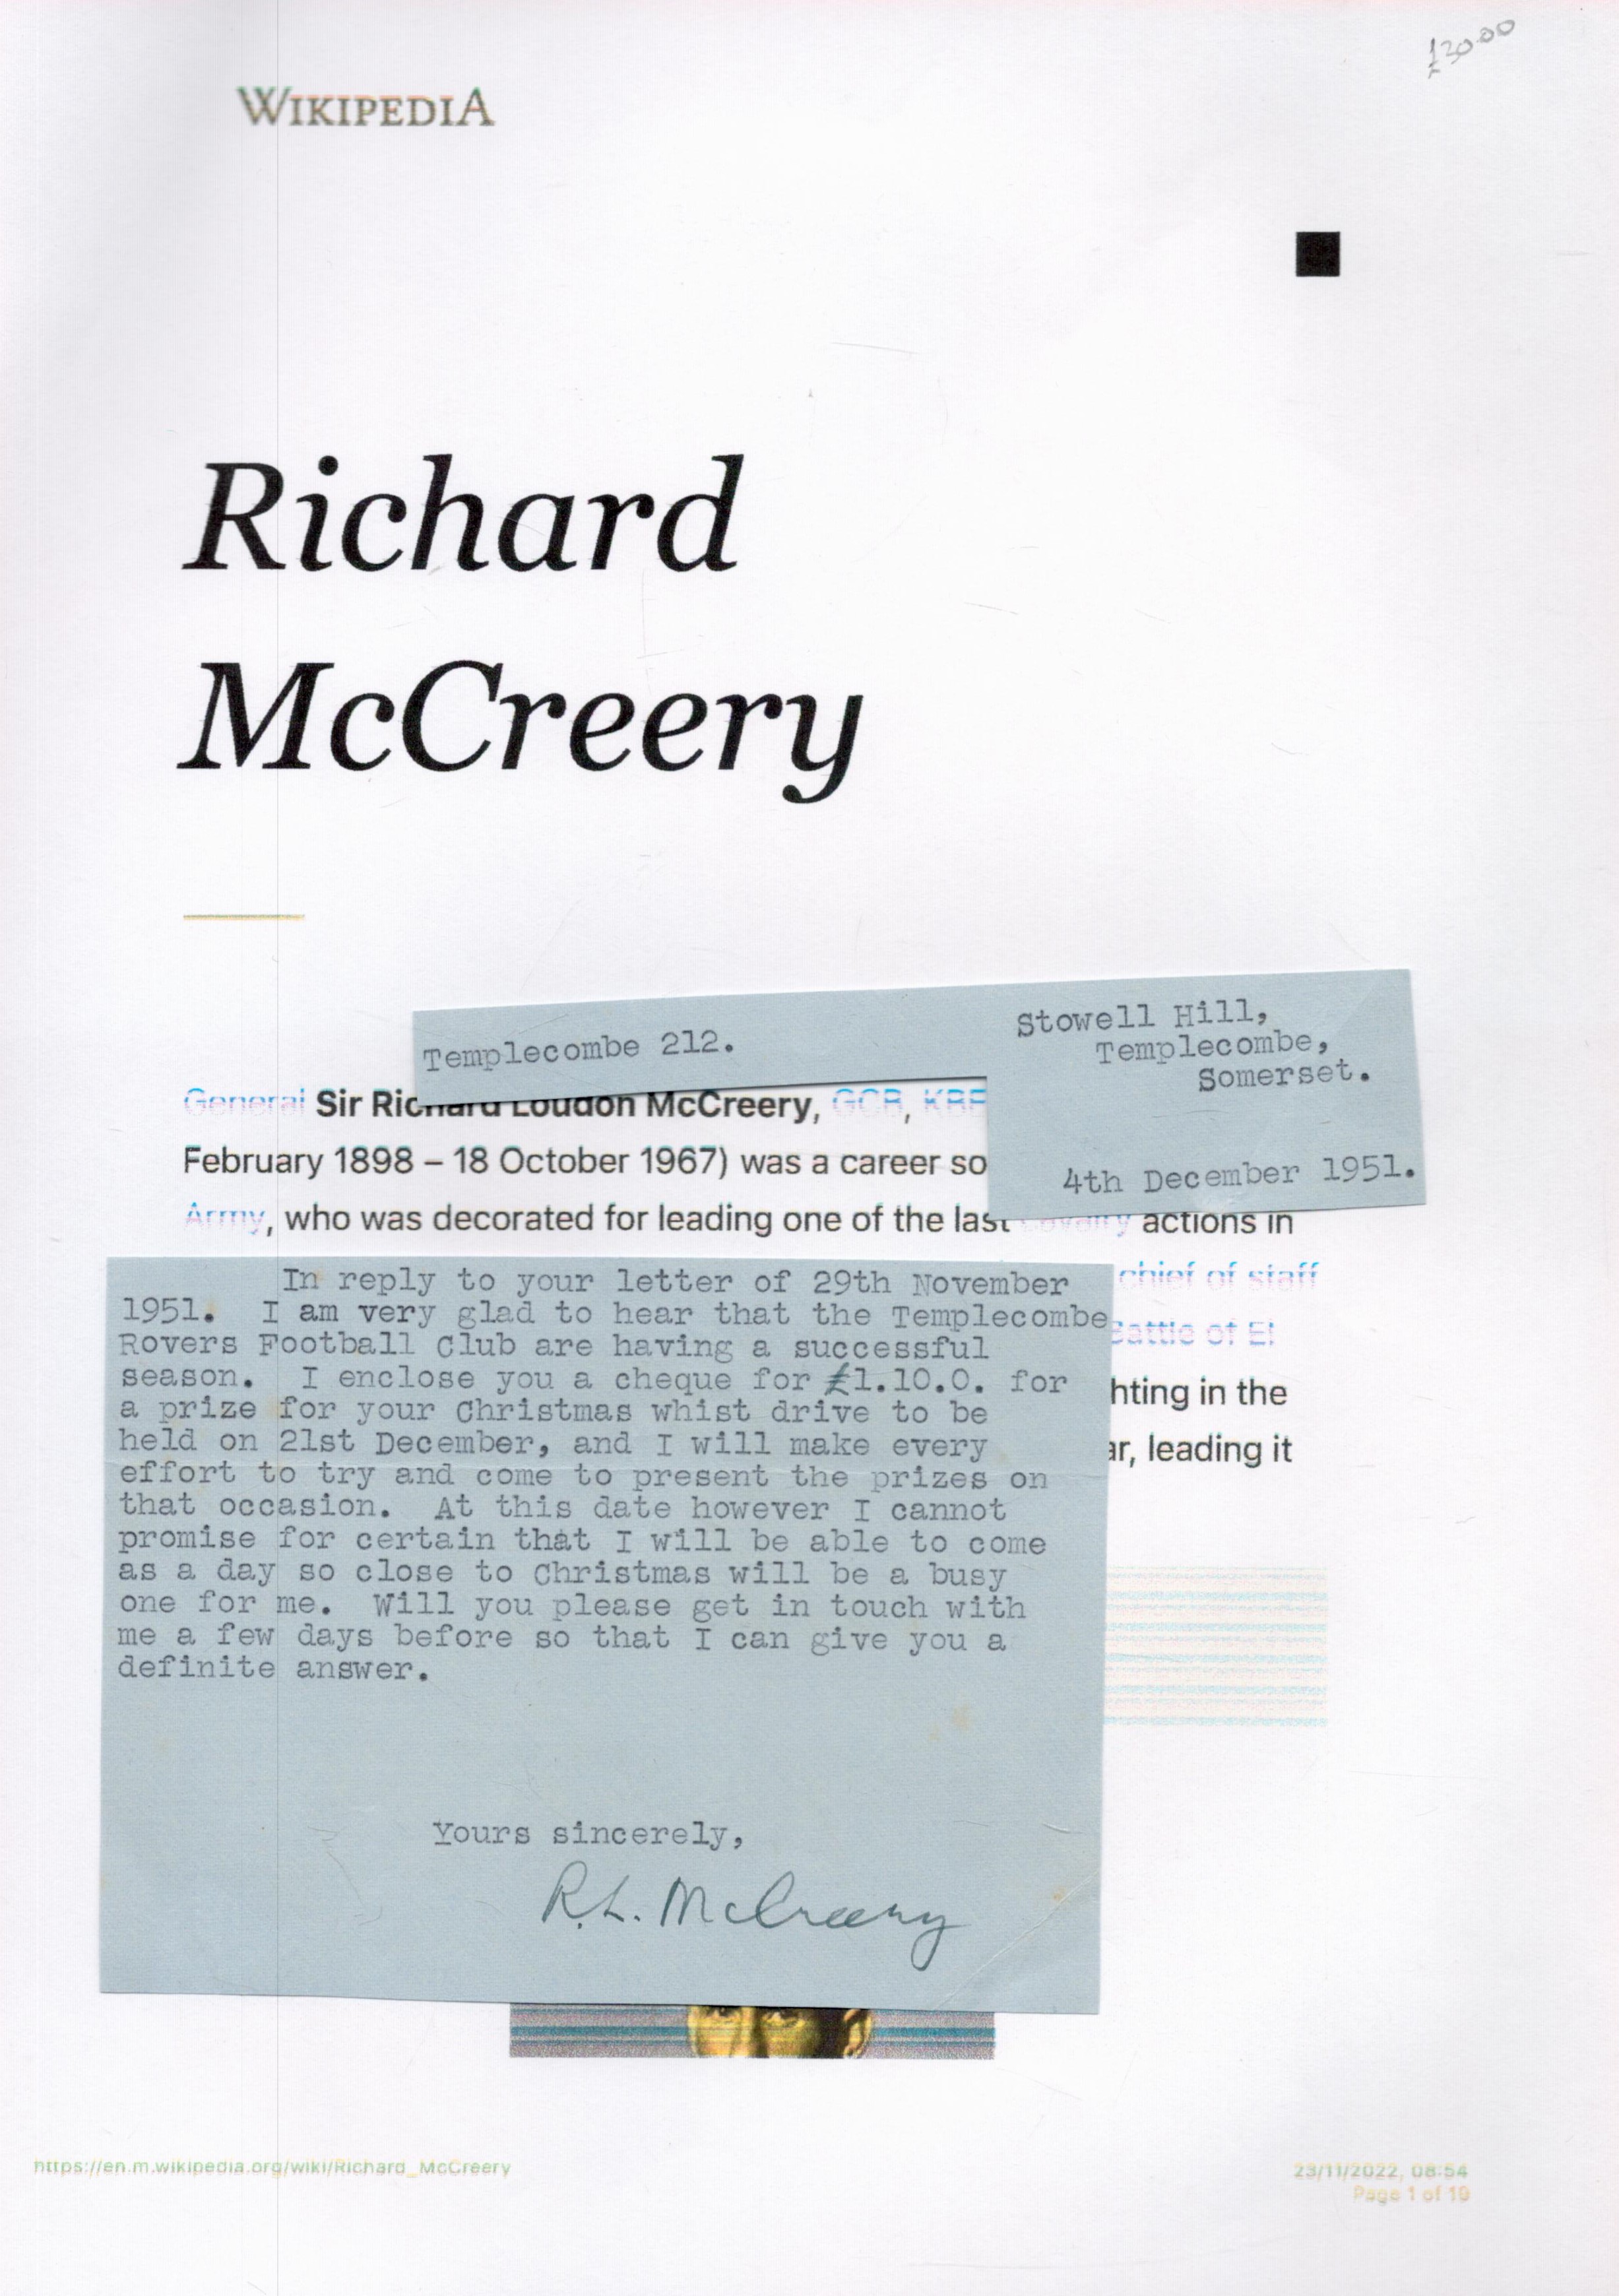 General Sir Richard L McCreery, GCB, KBE, DSO, MC Signed TLS Dated 4th December 1951. Letter has